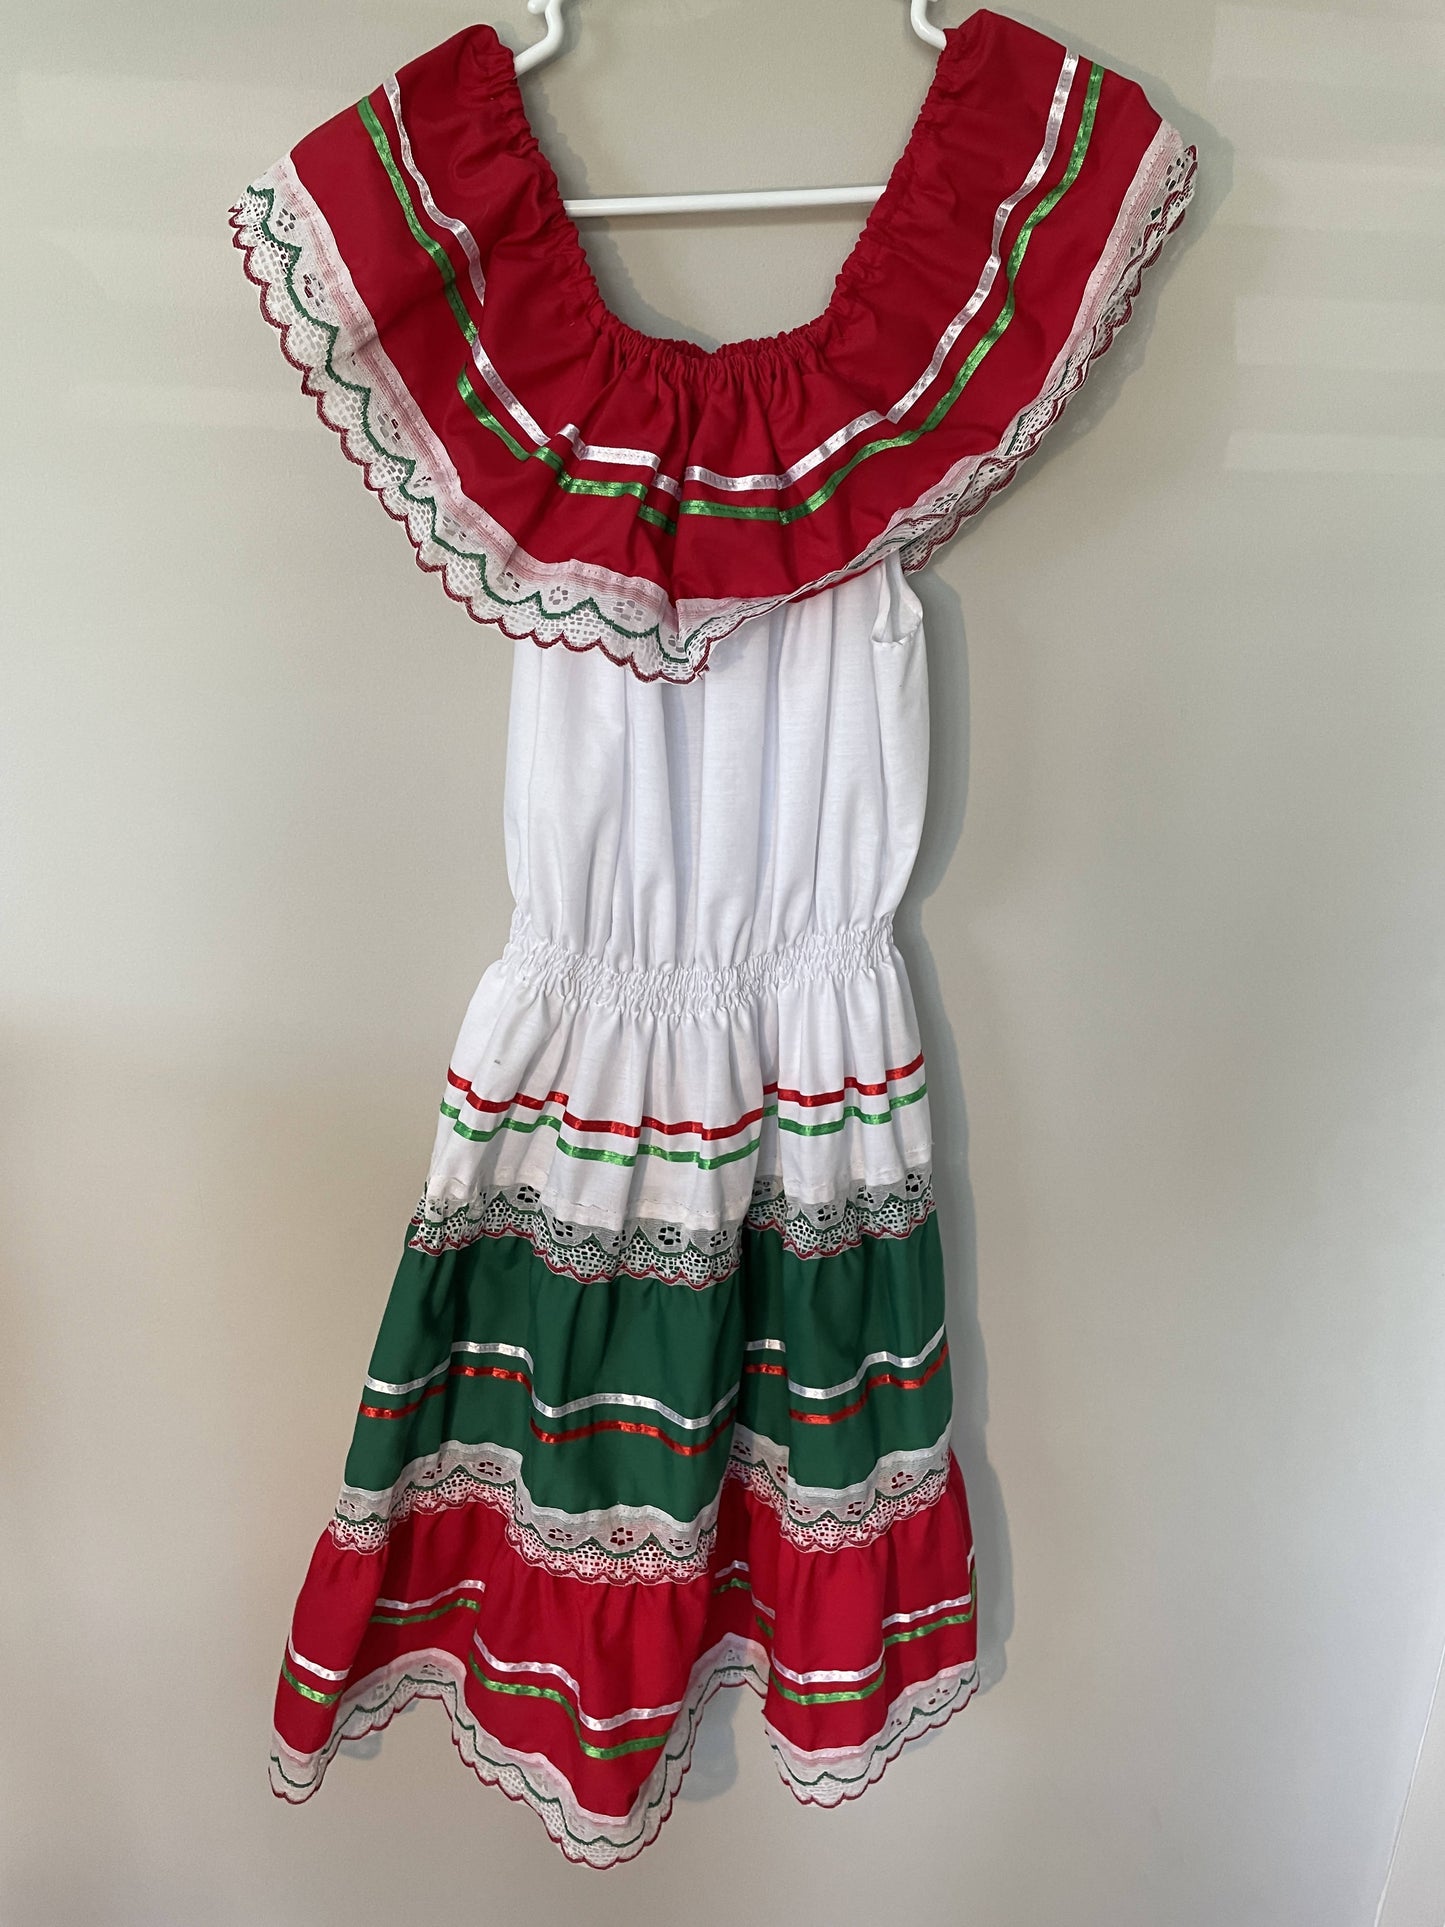 Traditional Mexican dress